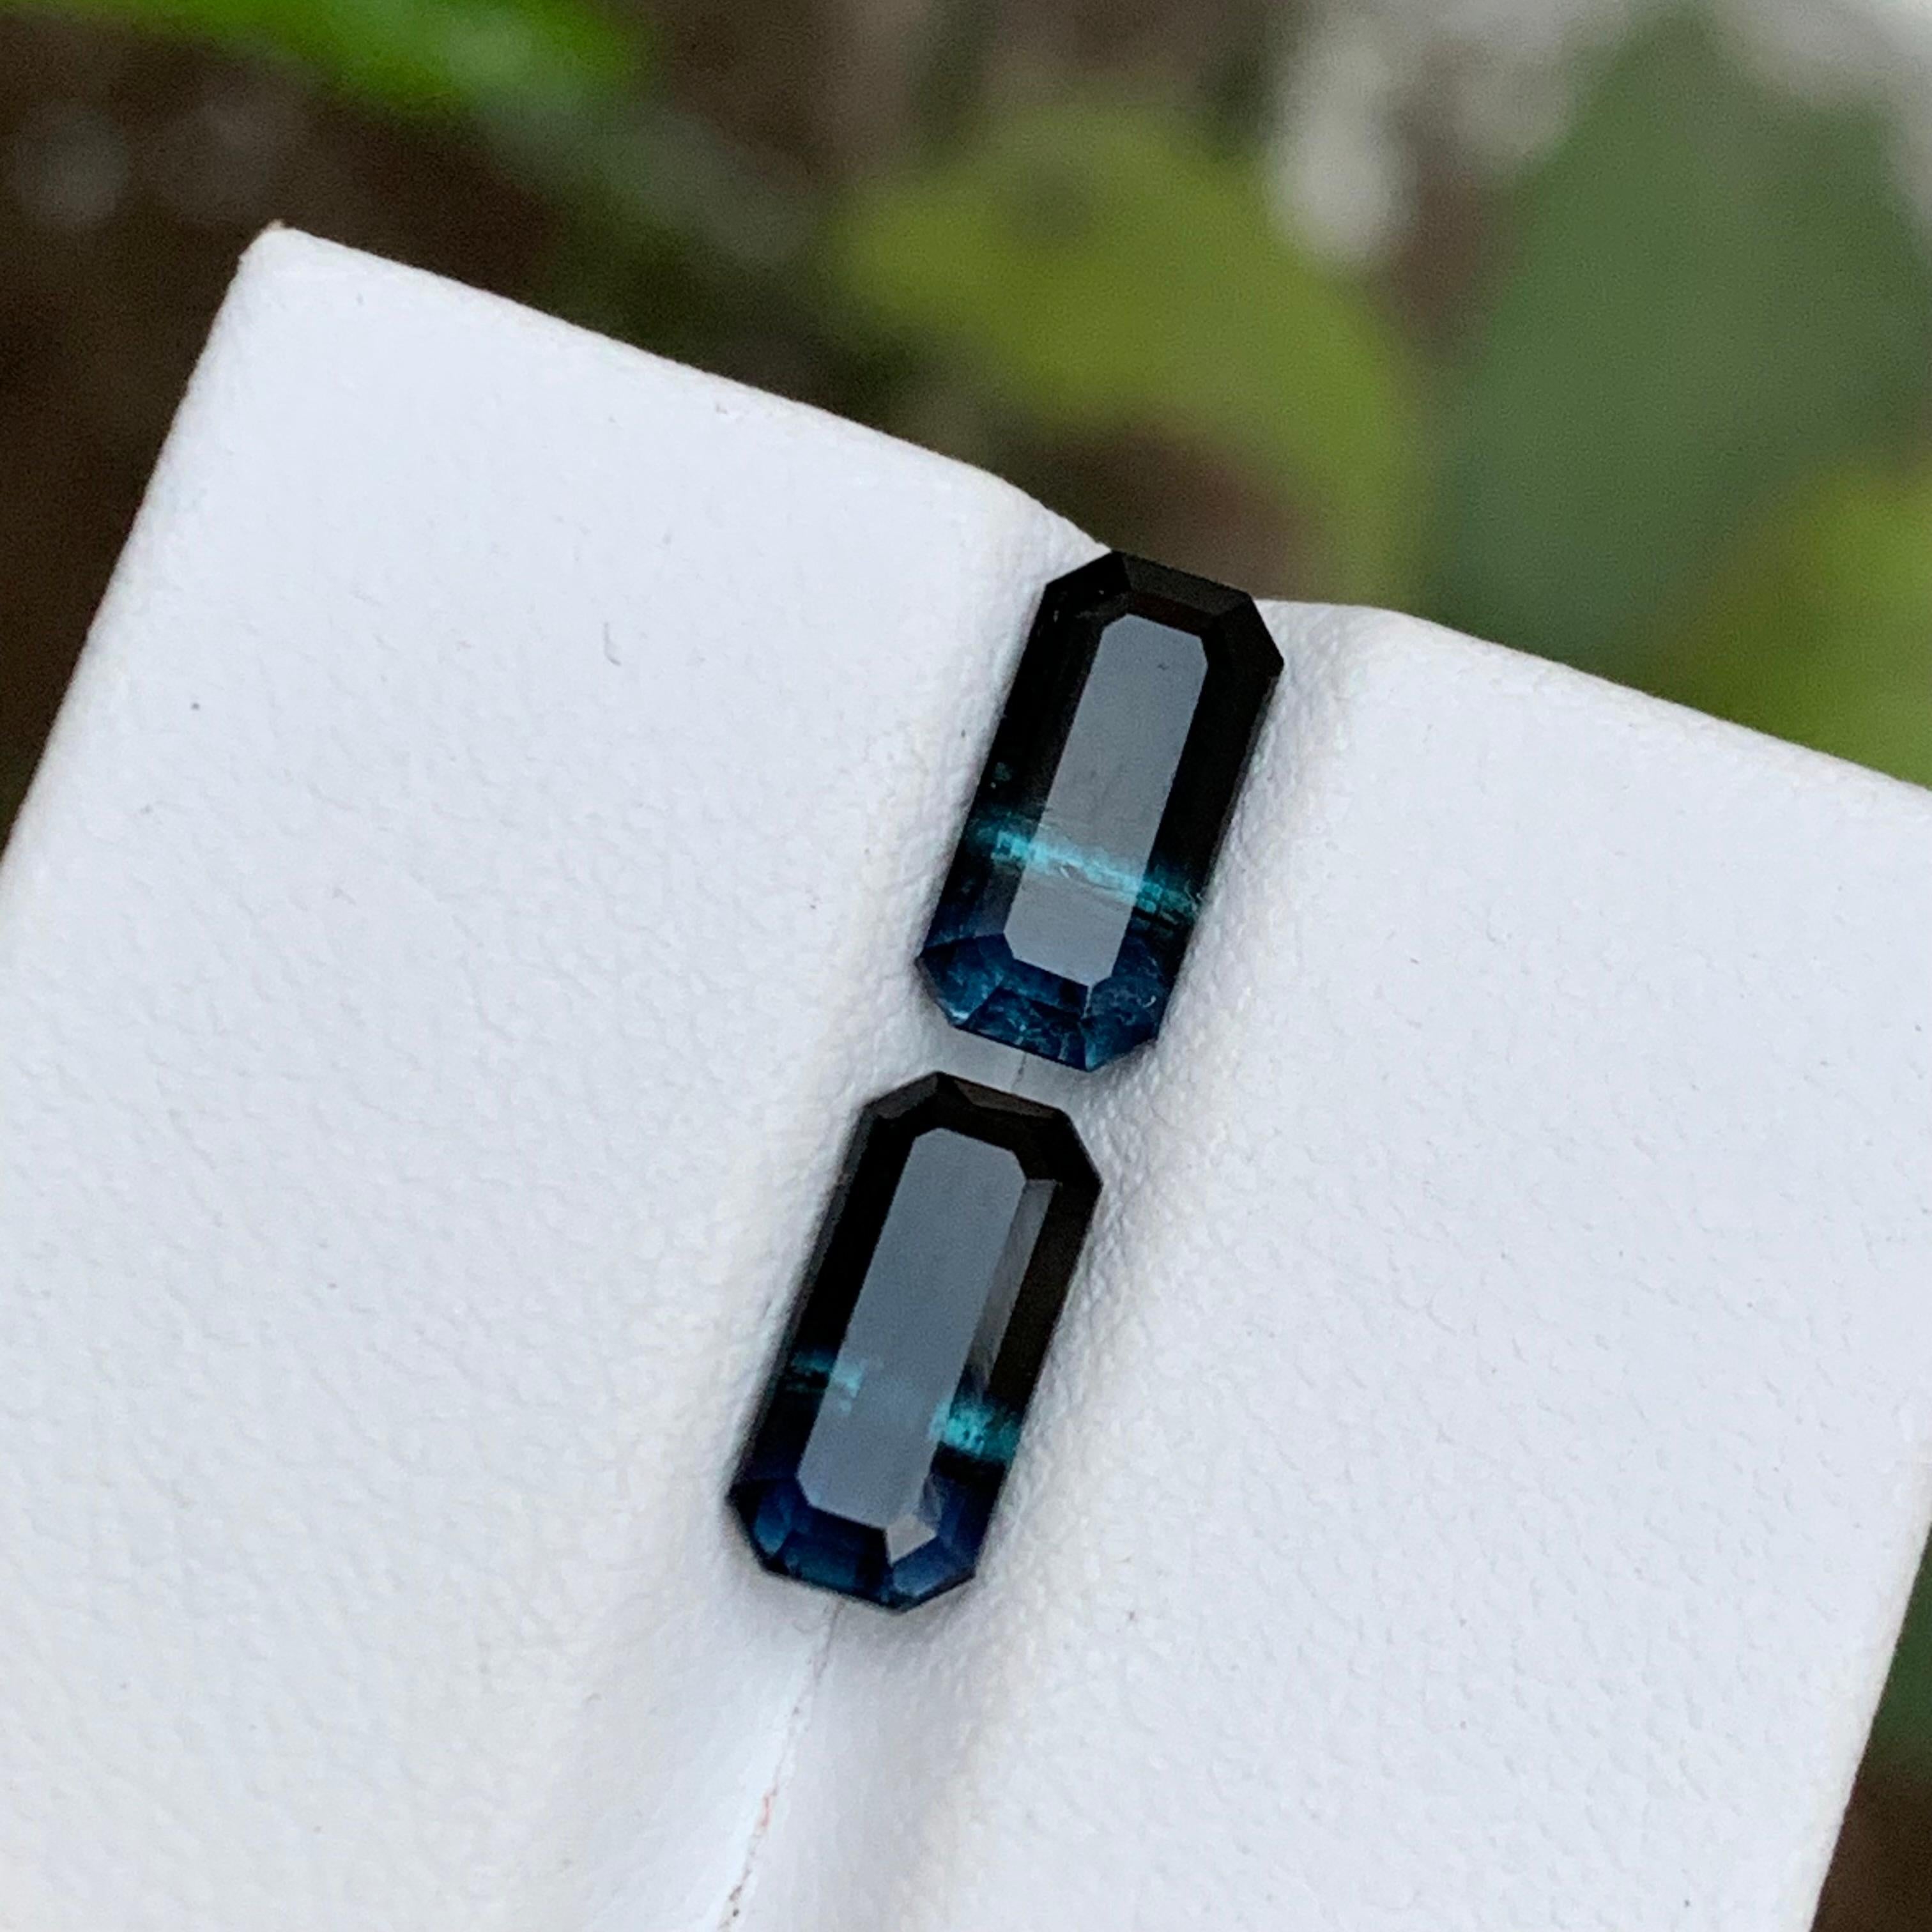 GEMSTONE TYPE: Tourmaline
PIECE(S): Pair
WEIGHT: 3.10 Carats
SHAPE: Emerald
SIZE (MM): 
1.50 Carat: 9.38 x 4.60 x 3.85
1.55 Carat: 9.45 x 4.58 x 3.89
COLOR: Bicolor Black and Blue
CLARITY: Slightly Included
TREATMENT: None
ORIGIN: